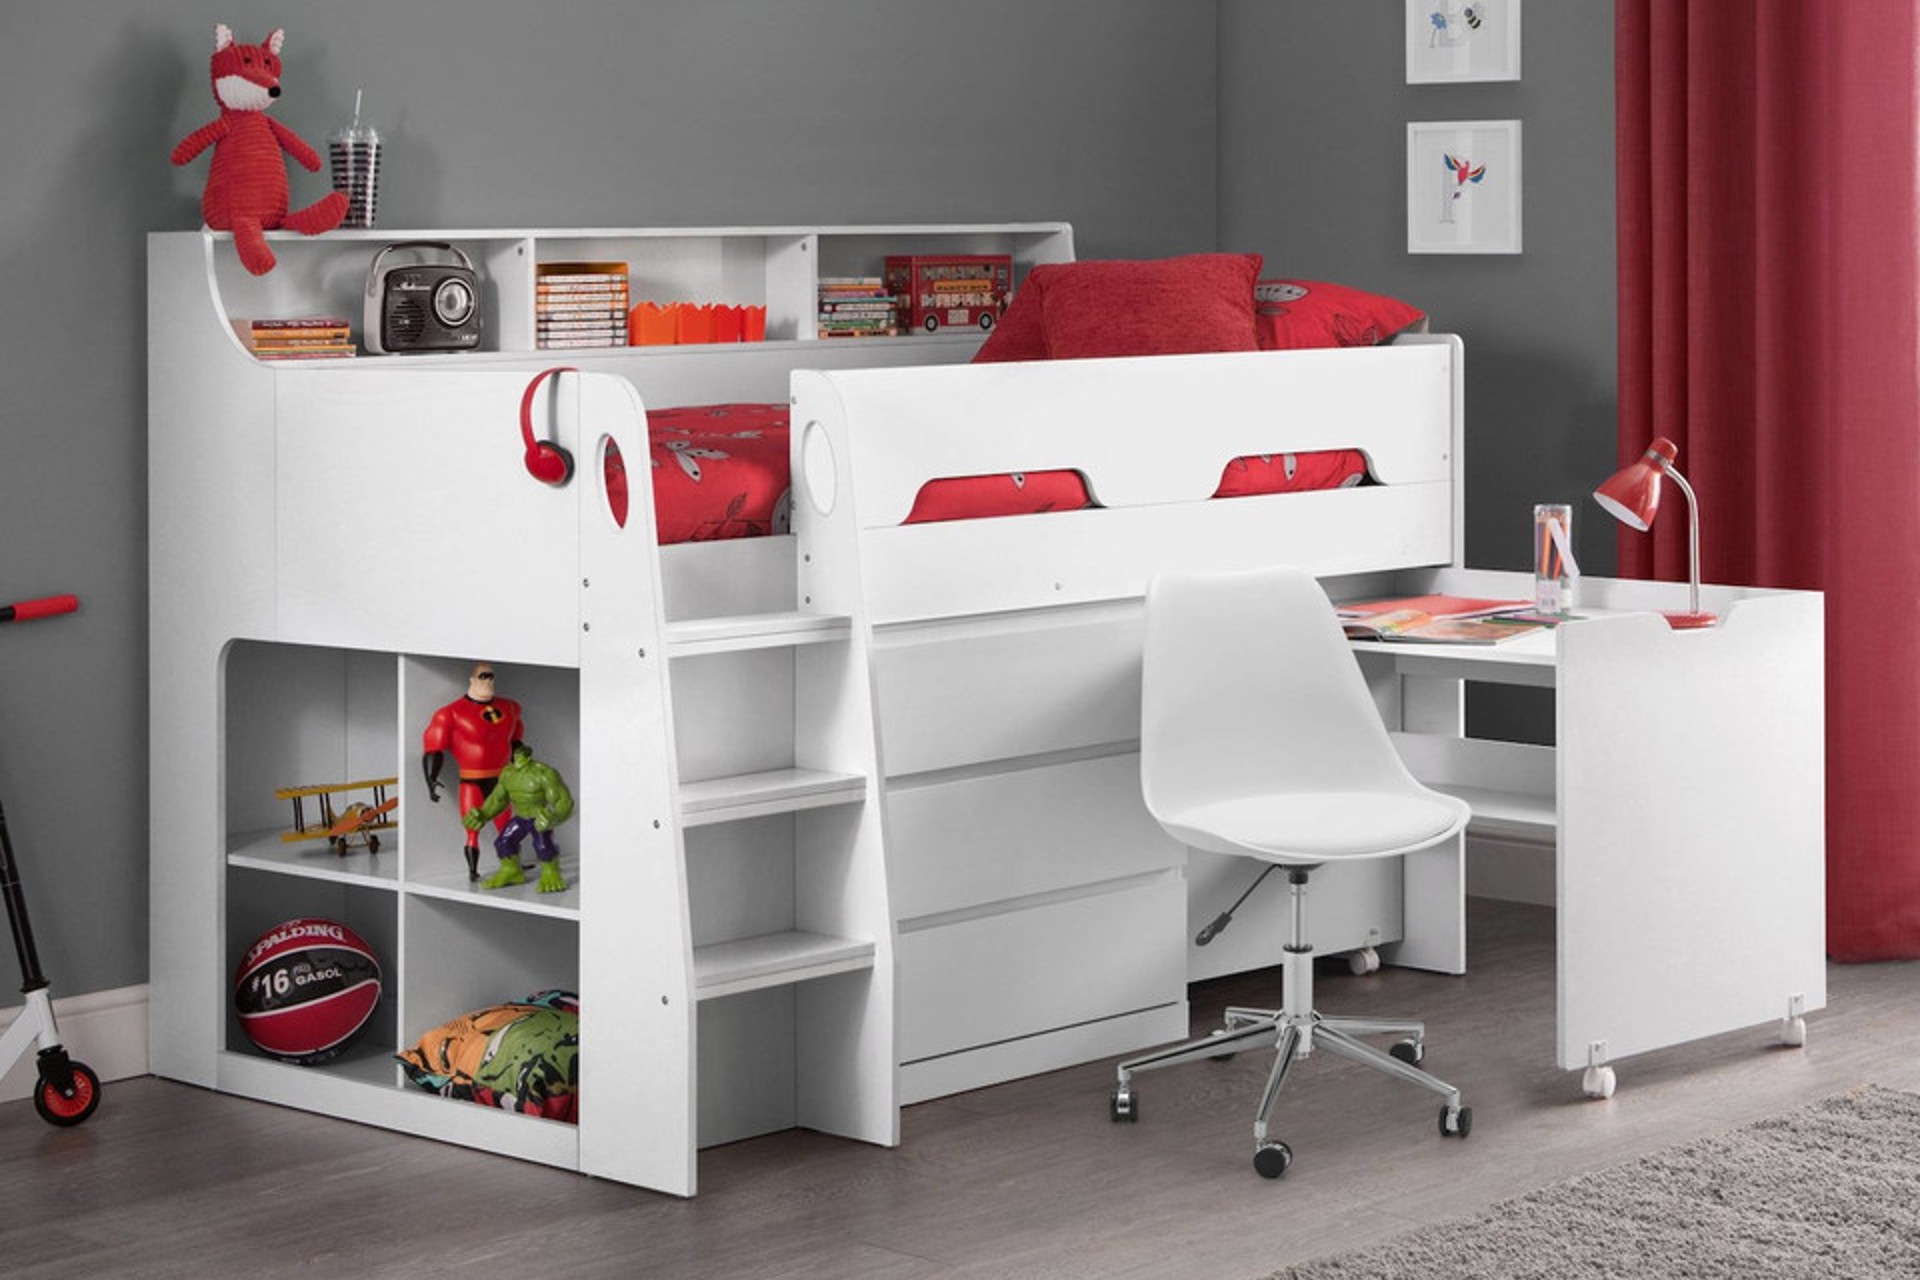 Jupiter White Wooden Midsleeper bed and mattress Set with pull out desk and white chest of drawers storage